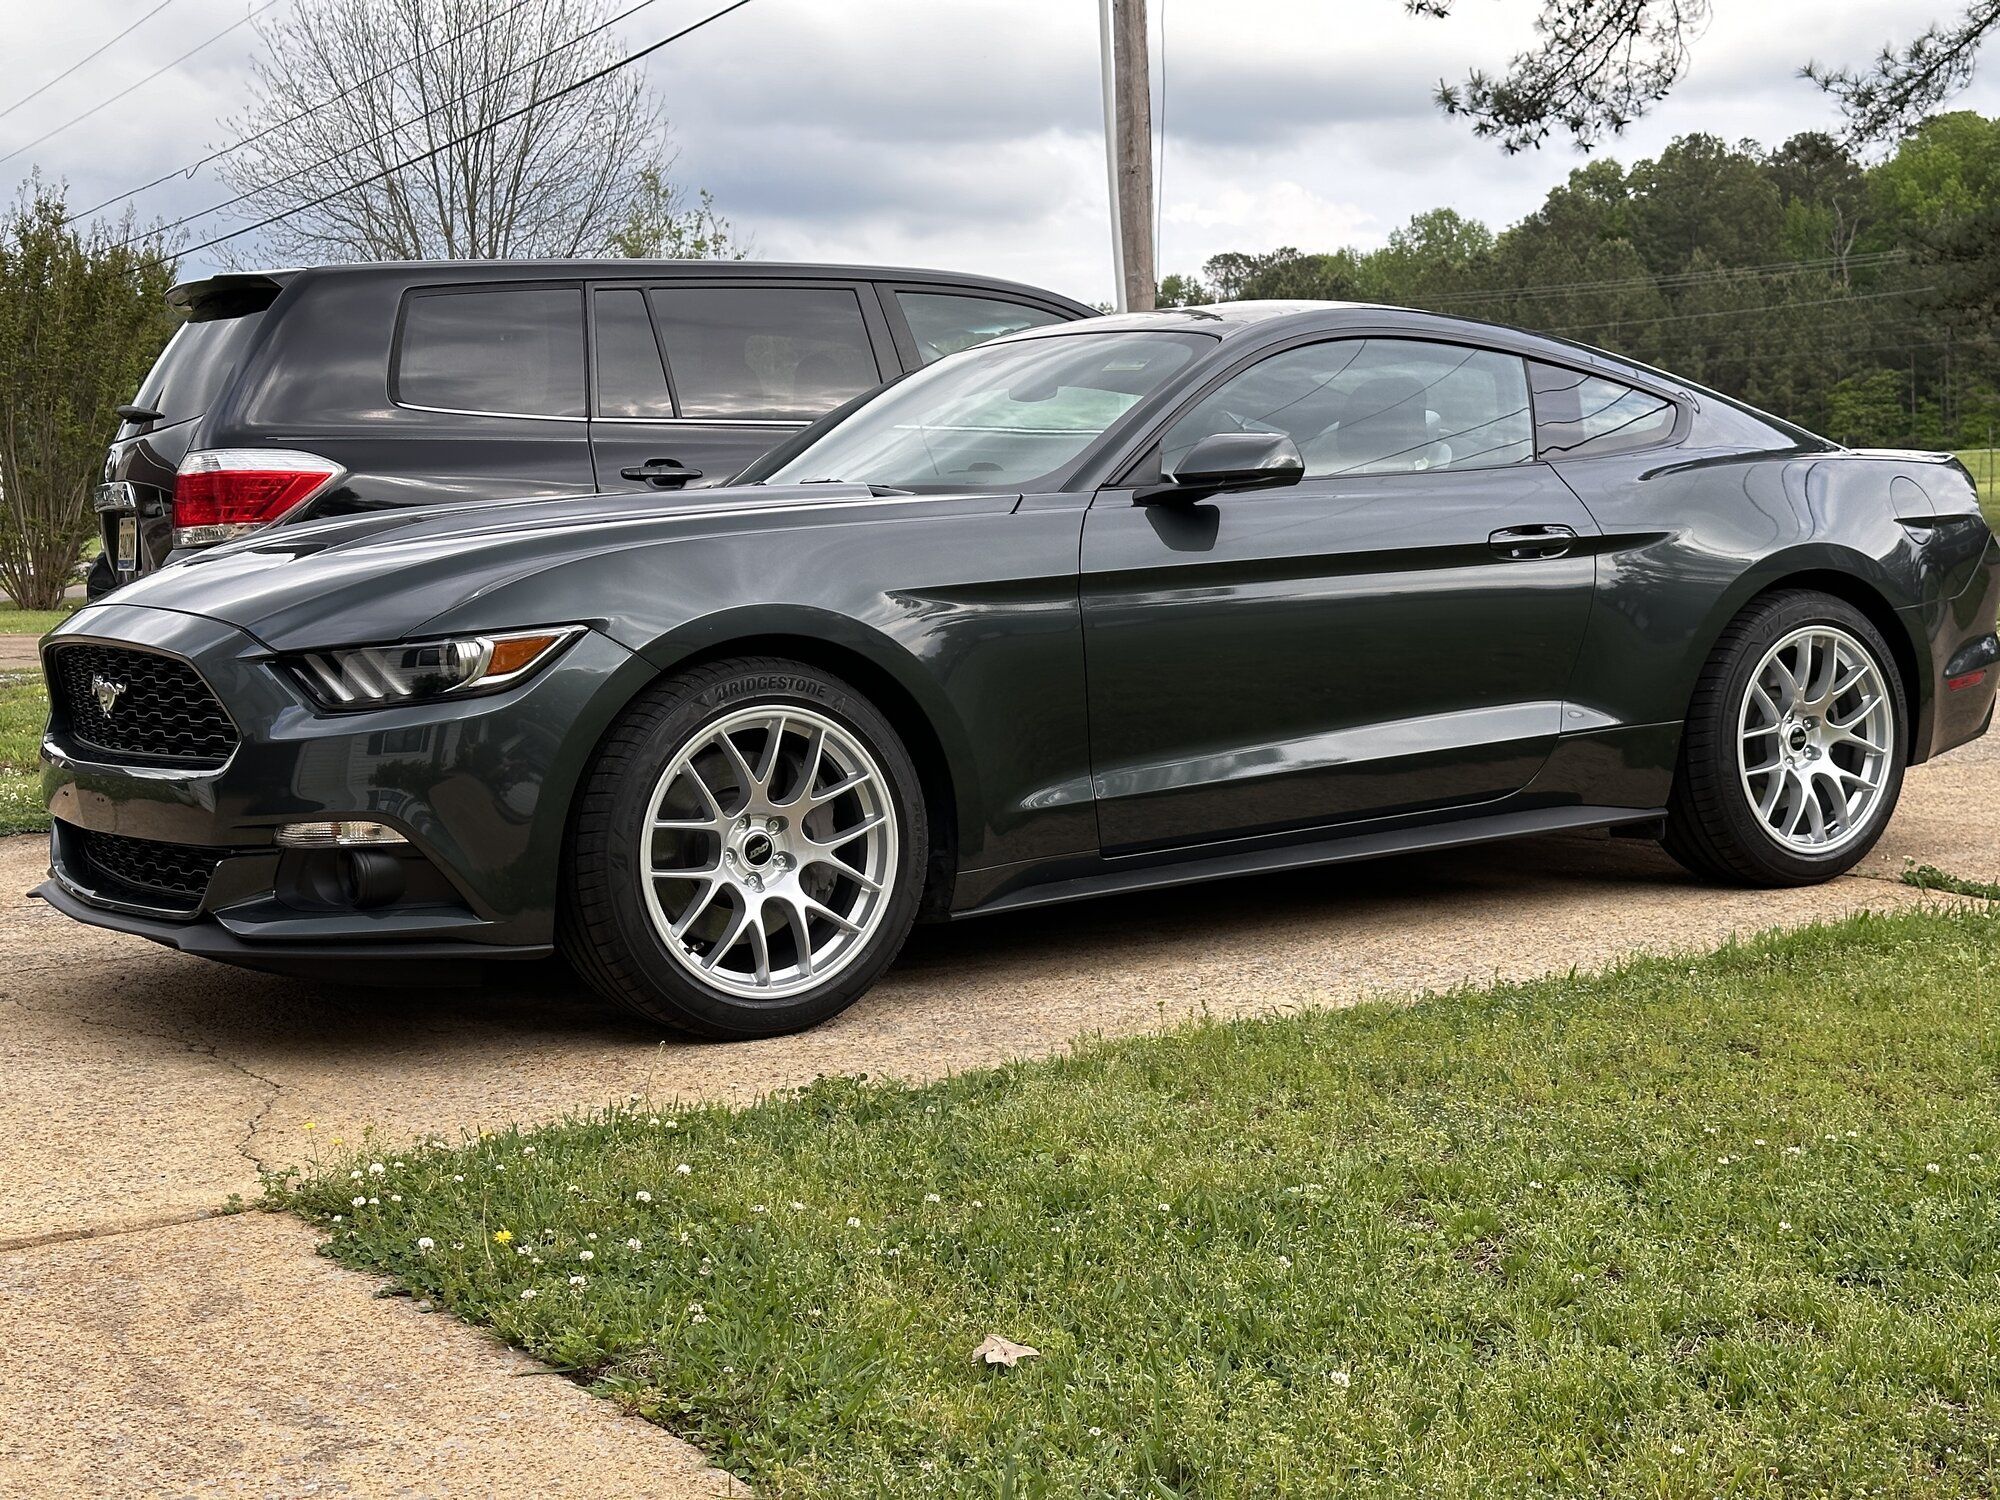 2016 Mustang
EcoBoost AutoX -  (It’s green, not gray Ecoboost)